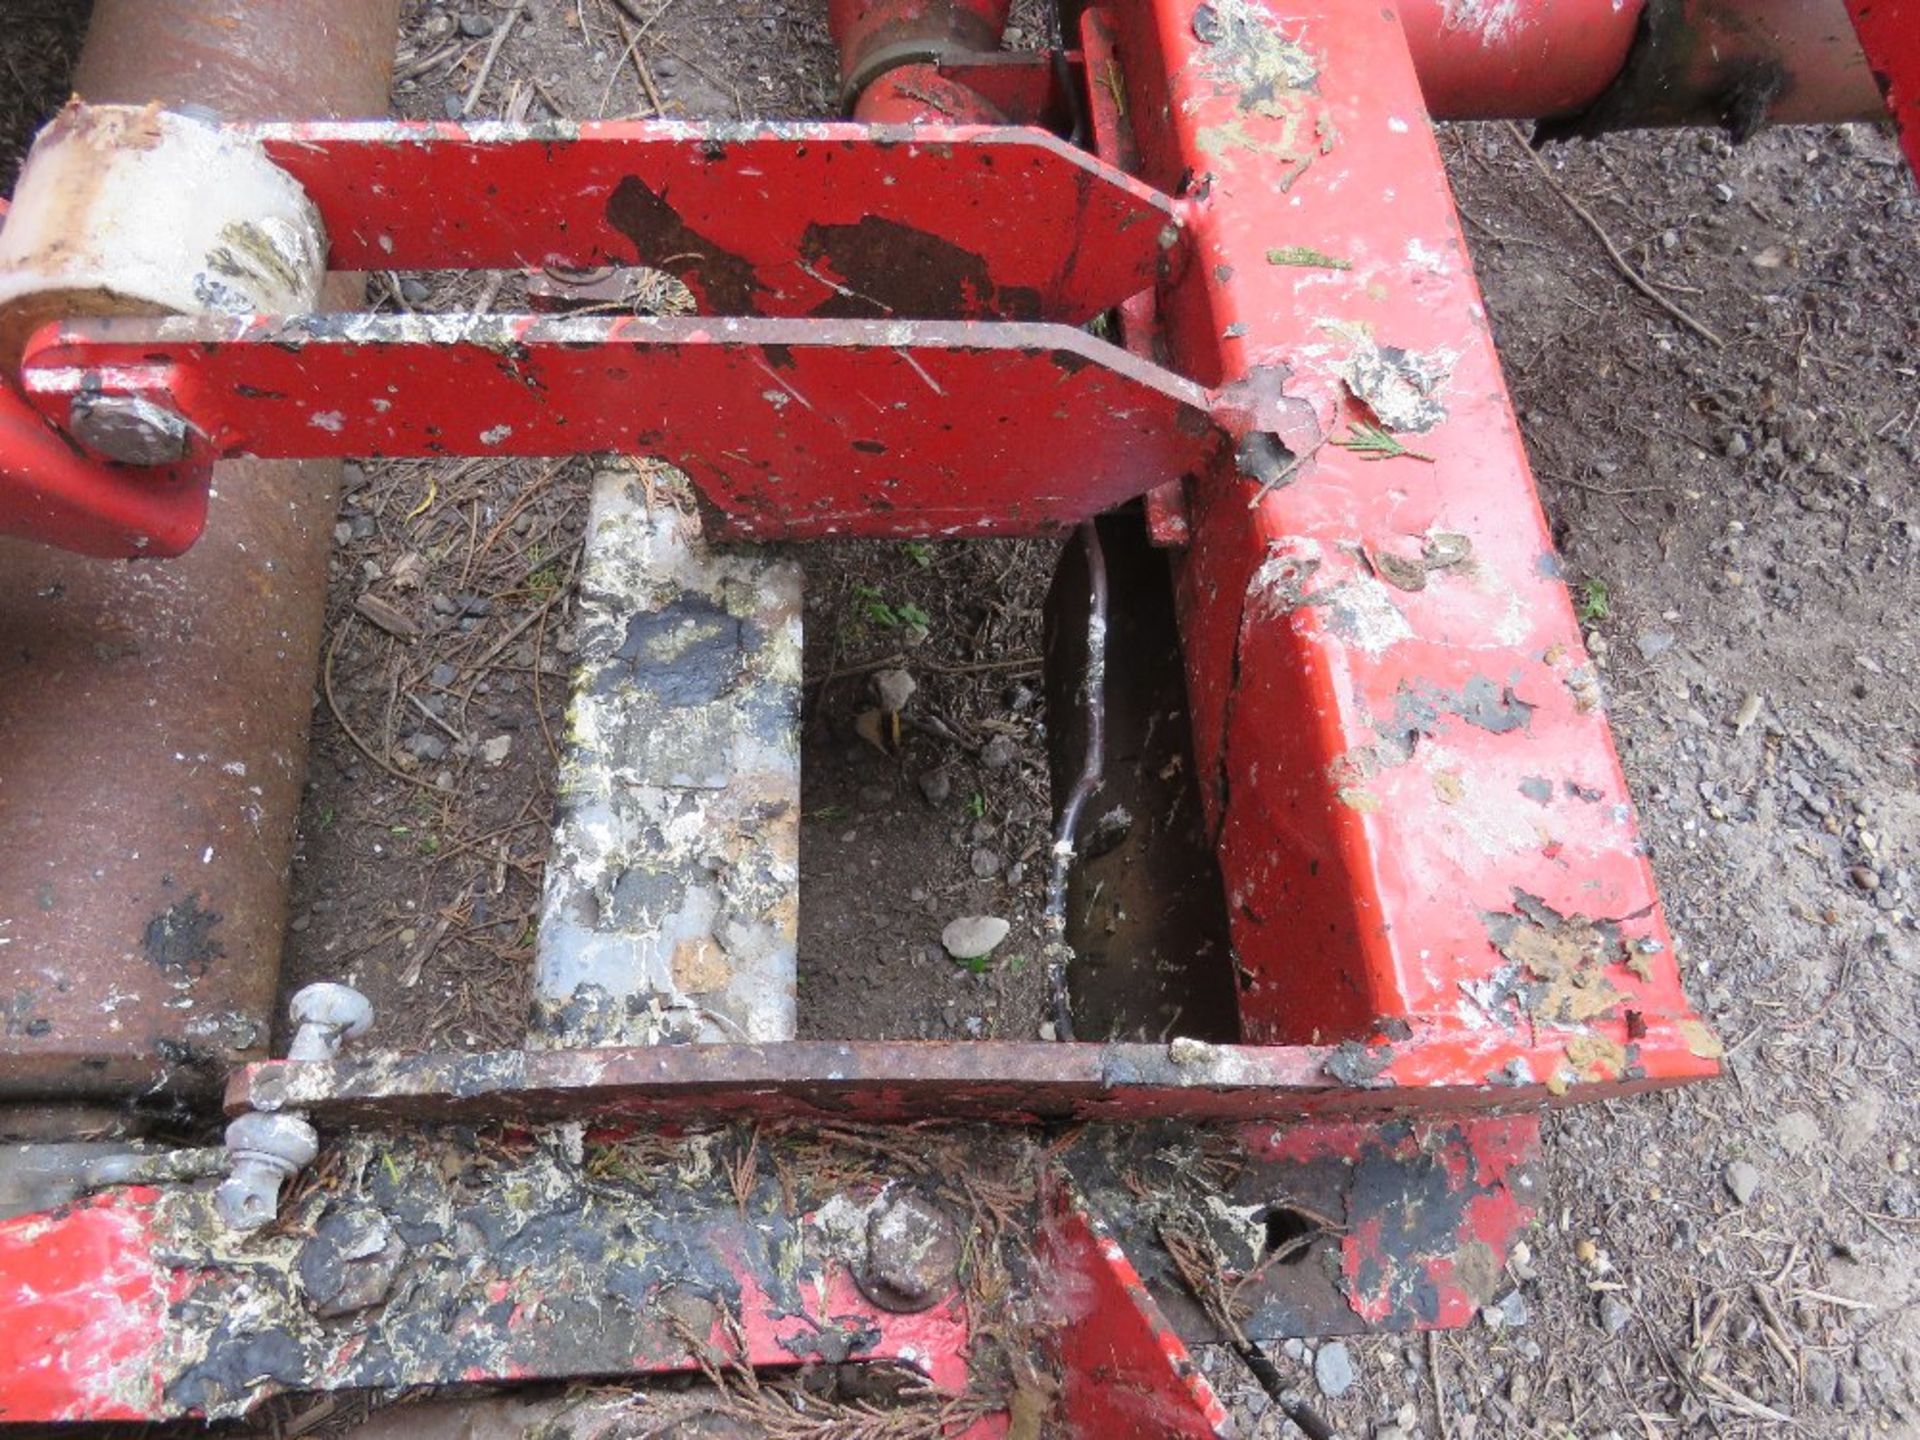 TRIMAX 728-610-400 BATWING TYPE ROLLER MOWER, YEAR 2017. PEGASUS S3 HEADS. NB: REQUIRES REPAIR TO CH - Image 12 of 13